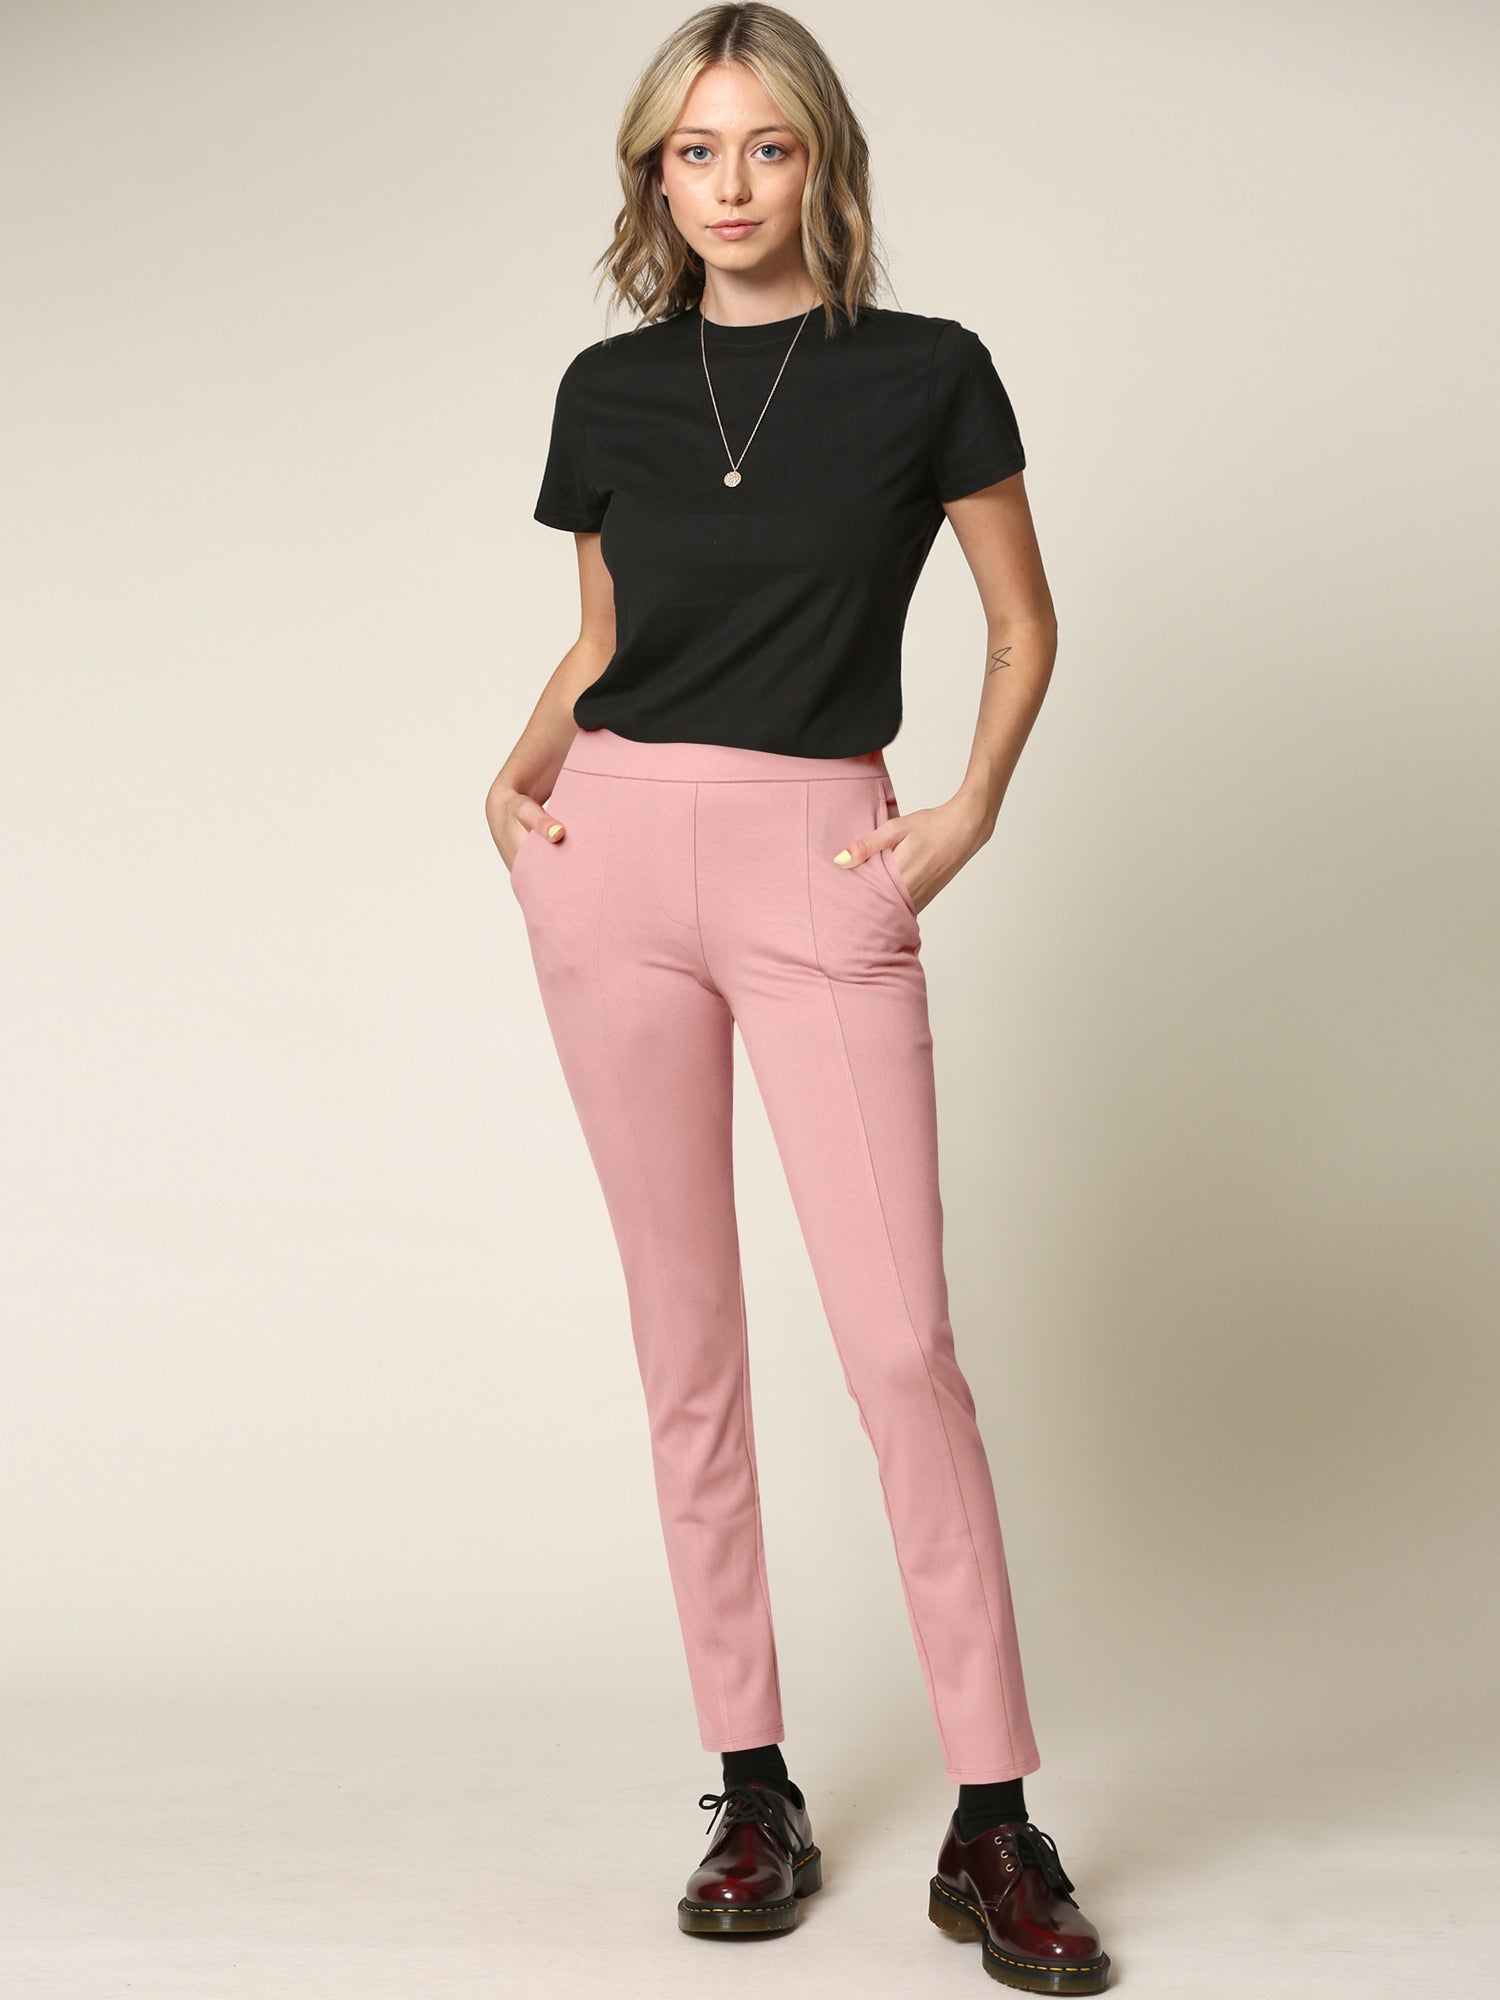 Women's Pull On Legging Ponte Tummy Control Skinny Pant With Pockets